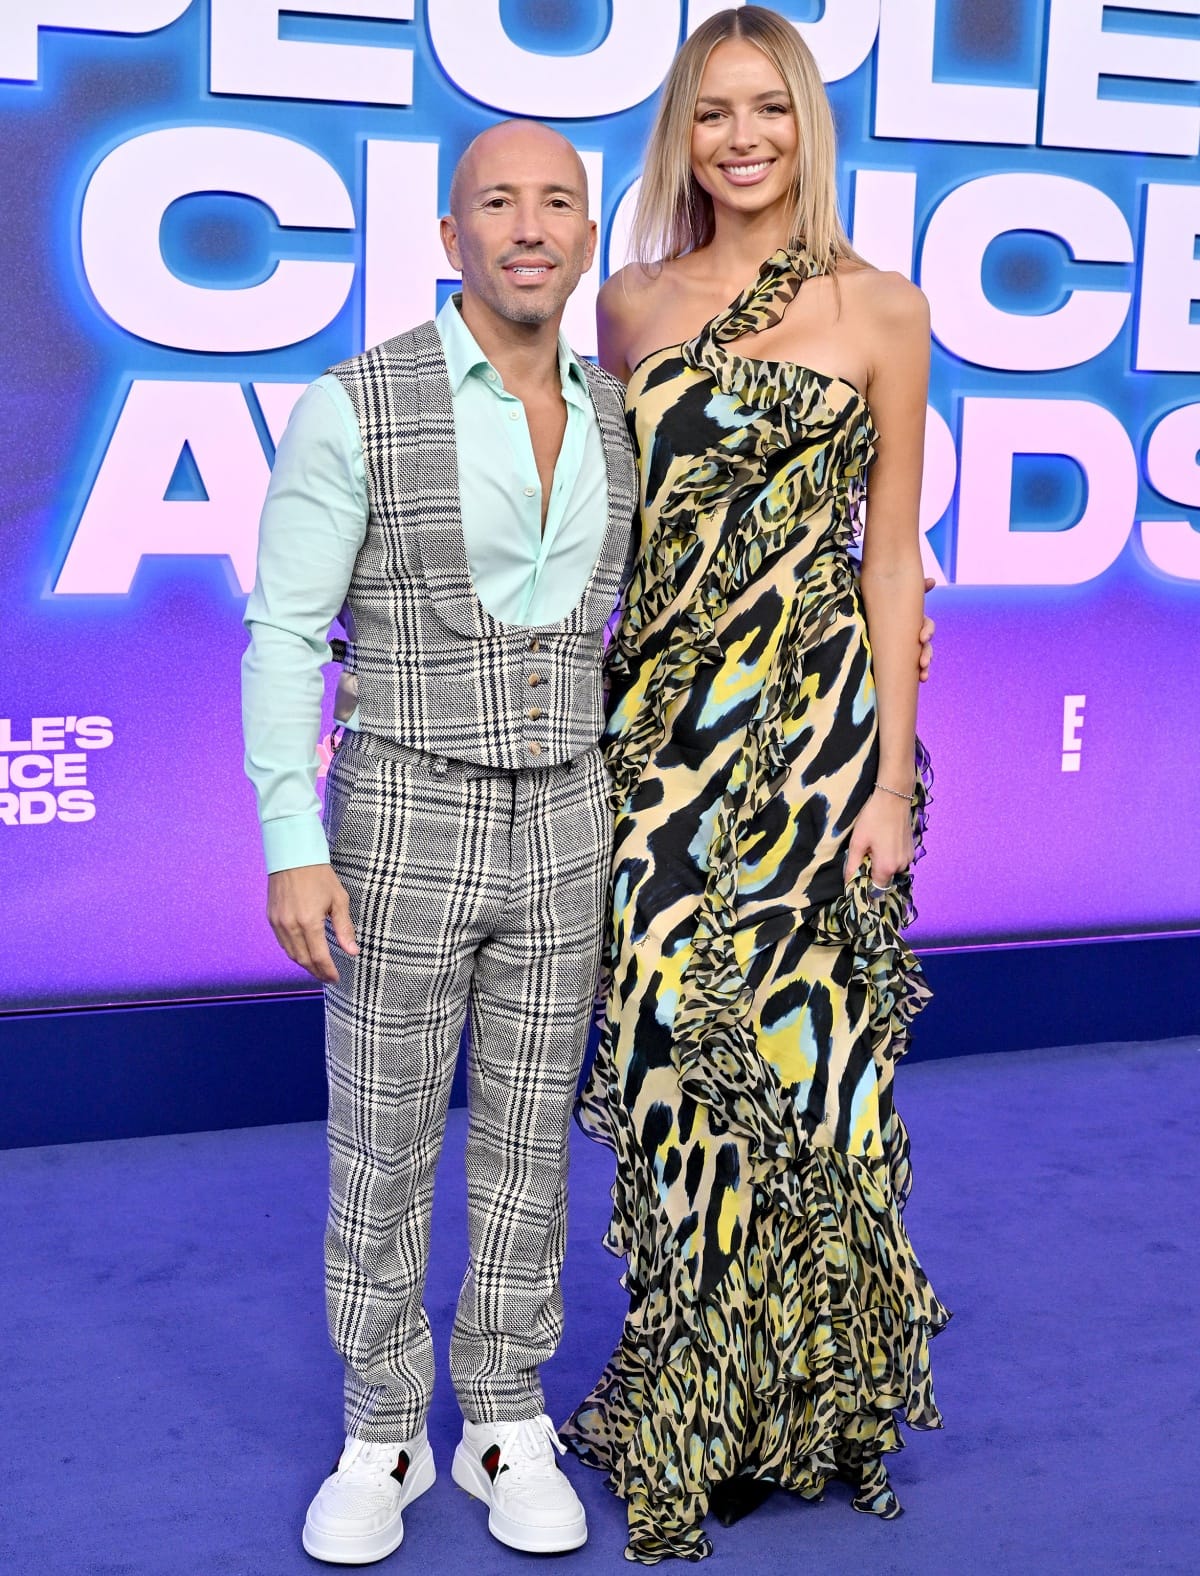 Their height difference is evident when Jason Oppenheim and Marie-Lou Nurk are standing next to each other as in their appearance at the 2022 People’s Choice Awards